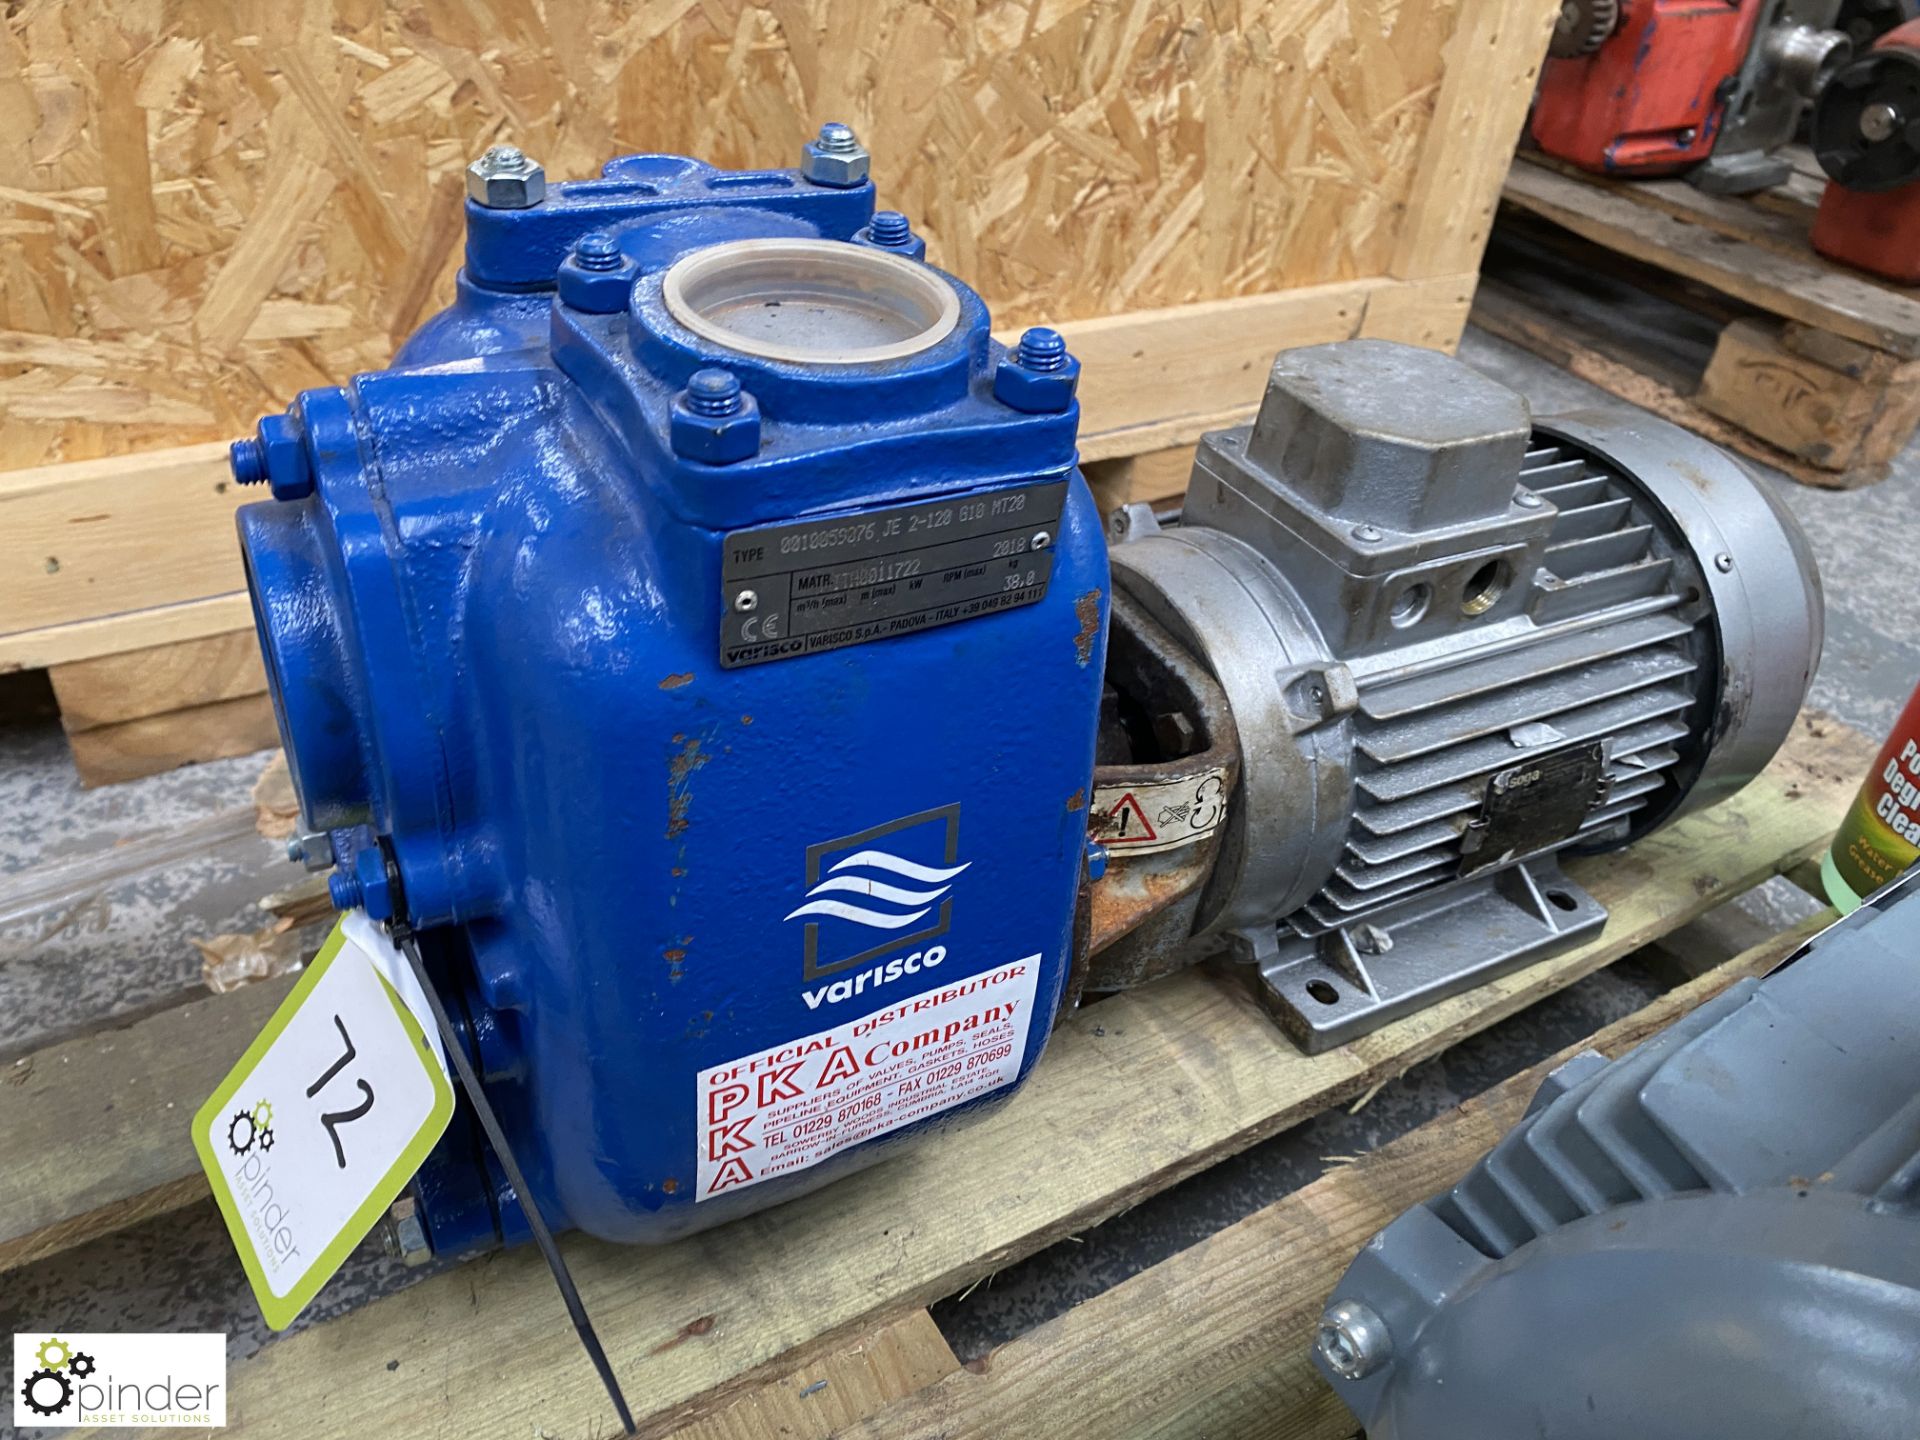 Varisco 0010059076 JE2-120 G10MT20 Pump, year 2017, with 2.2kw electric motor, 284rpm (Location